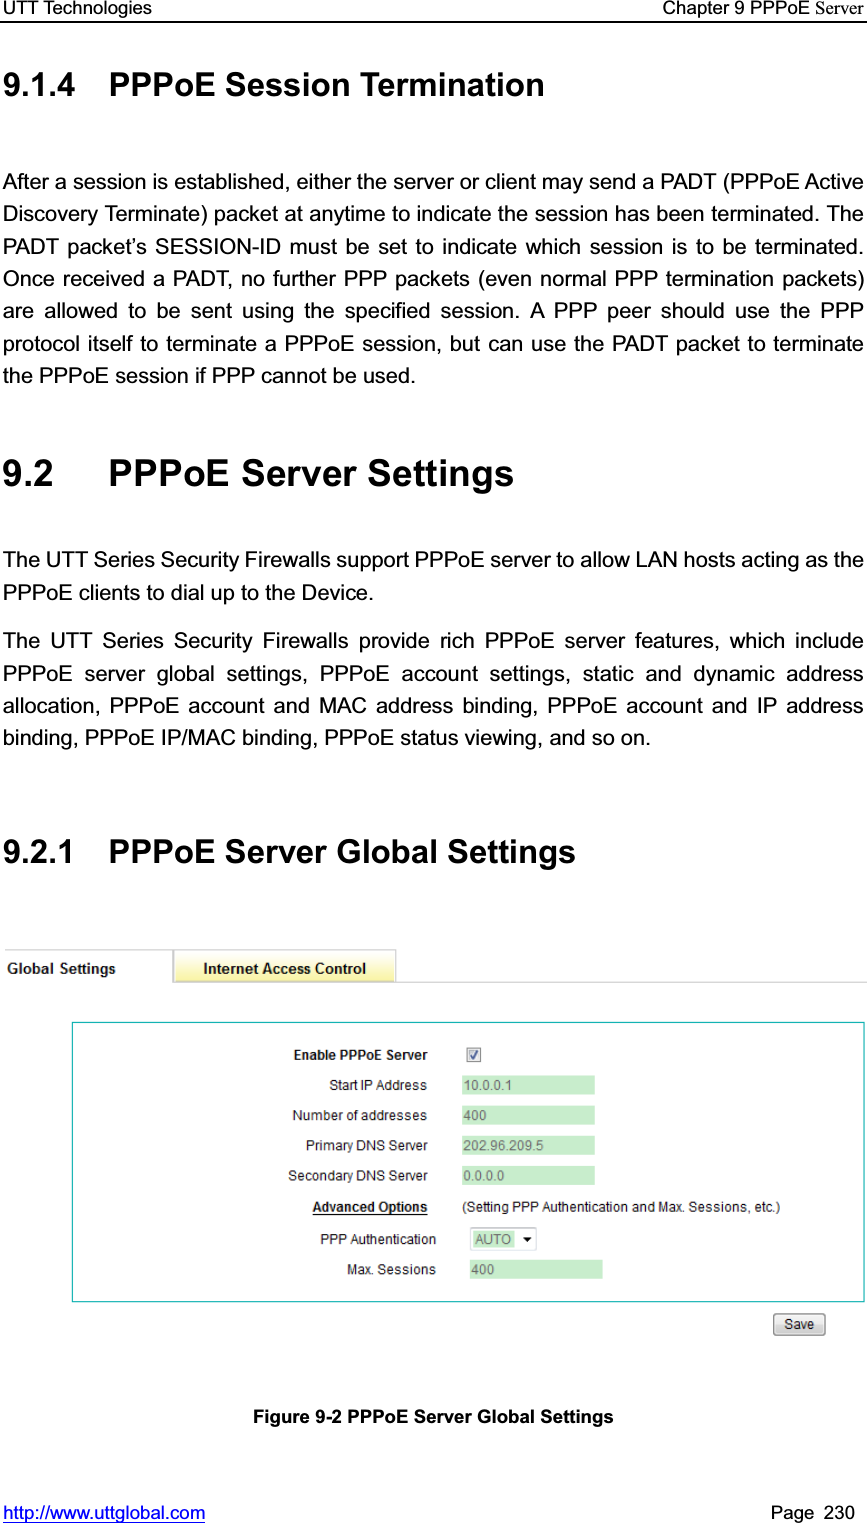 UTT Technologies    Chapter 9 PPPoE Serverhttp://www.uttglobal.com Page 230 9.1.4 PPPoE Session Termination After a session is established, either the server or client may send a PADT (PPPoE Active Discovery Terminate) packet at anytime to indicate the session has been terminated. The PADT packet¶s SESSION-ID must be set to indicate which session is to be terminated. Once received a PADT, no further PPP packets (even normal PPP termination packets) are allowed to be sent using the specified session. A PPP peer should use the PPP protocol itself to terminate a PPPoE session, but can use the PADT packet to terminate the PPPoE session if PPP cannot be used.   9.2 PPPoE Server Settings The UTT Series Security Firewalls support PPPoE server to allow LAN hosts acting as the PPPoE clients to dial up to the Device. The UTT Series Security Firewalls provide rich PPPoE server features, which include PPPoE server global settings, PPPoE account settings, static and dynamic address allocation, PPPoE account and MAC address binding, PPPoE account and IP address binding, PPPoE IP/MAC binding, PPPoE status viewing, and so on. 9.2.1 PPPoE Server Global Settings Figure 9-2 PPPoE Server Global Settings 